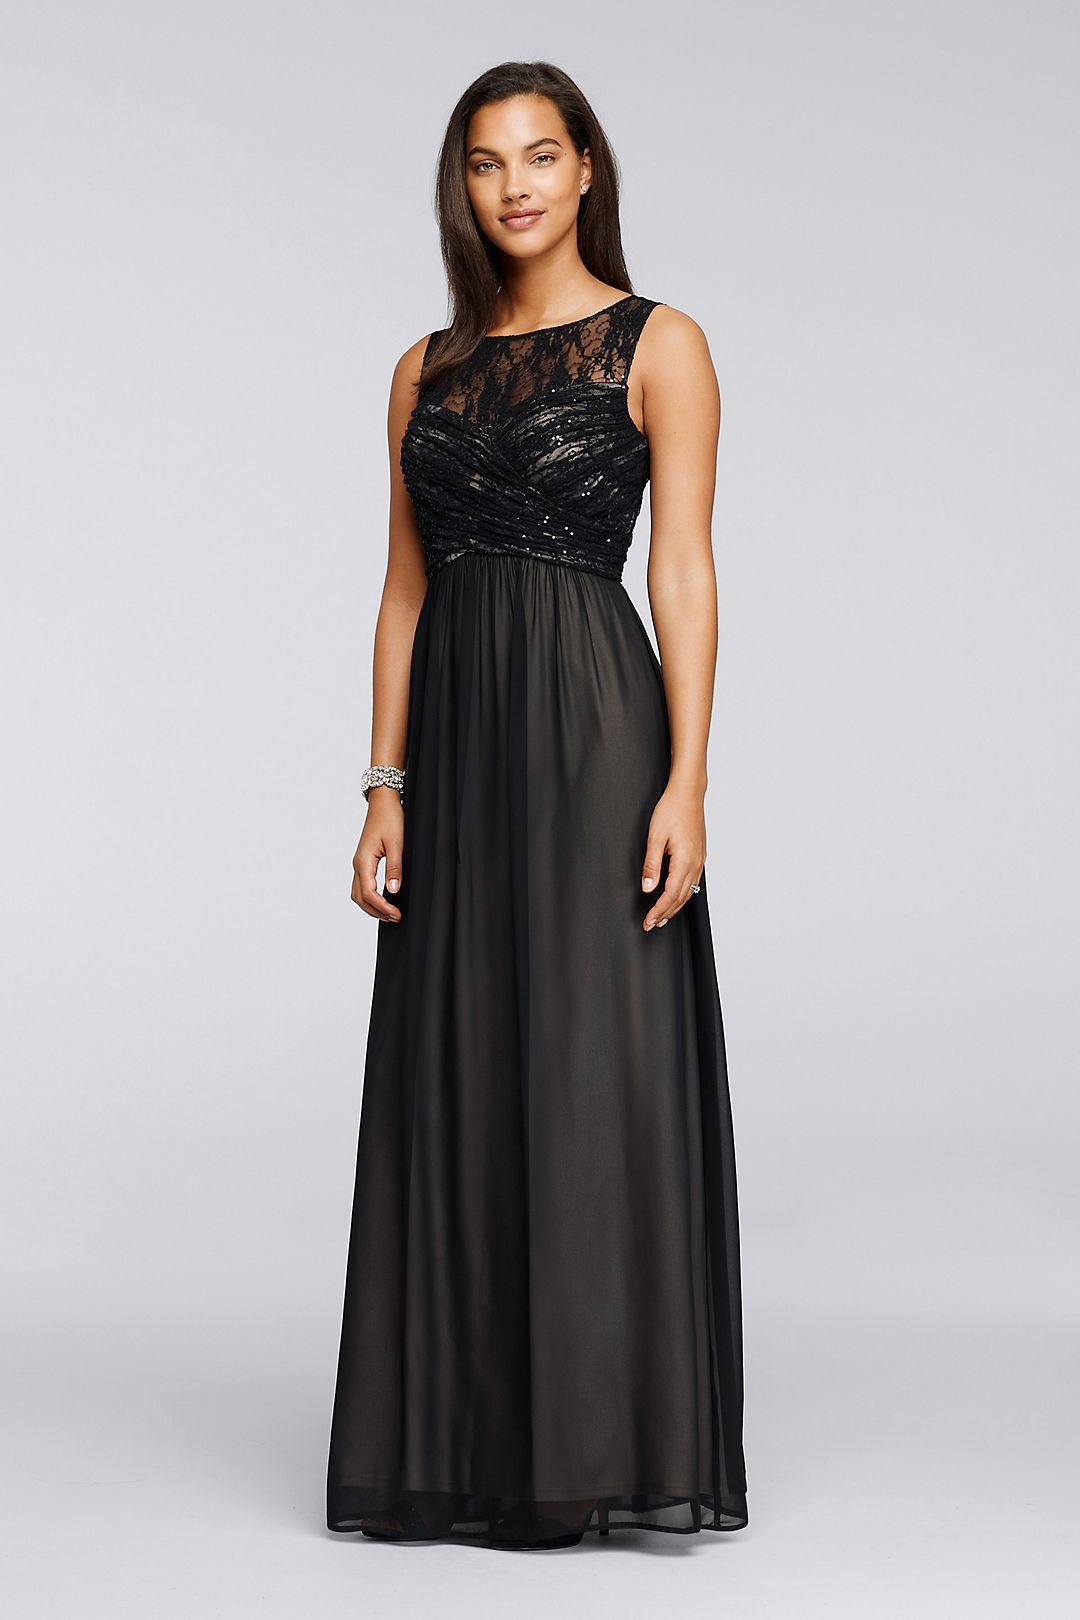 Ruched Long Dress with Illusion Neckline Image